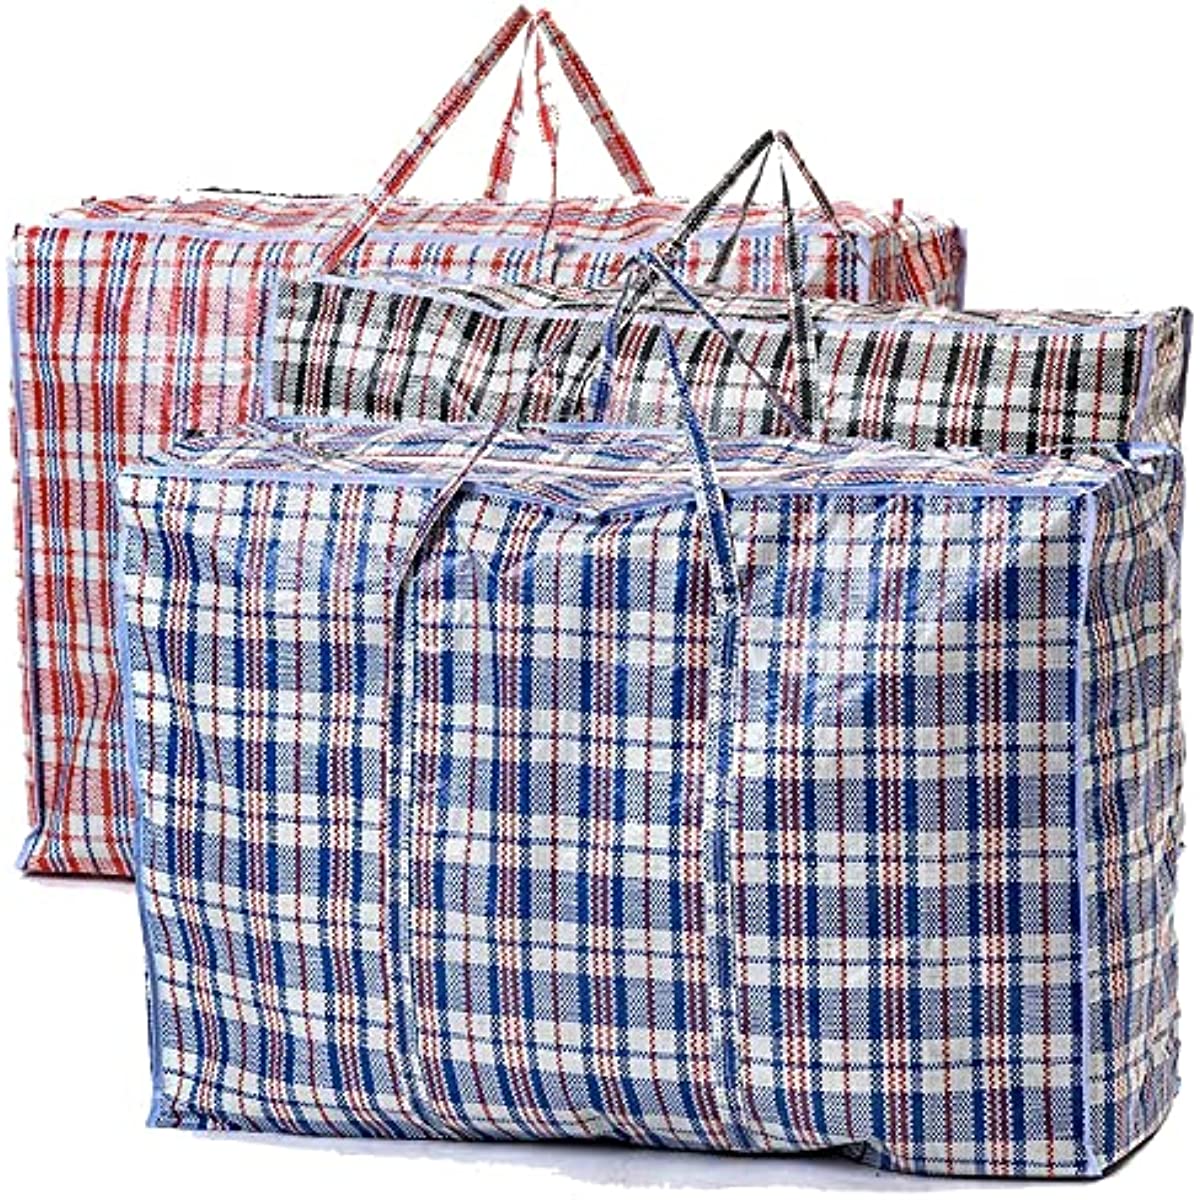 Heavy Duty Large Storage Bags, XL Blue Moving Bags for College Dorm Room  Essentials,4 Packs 